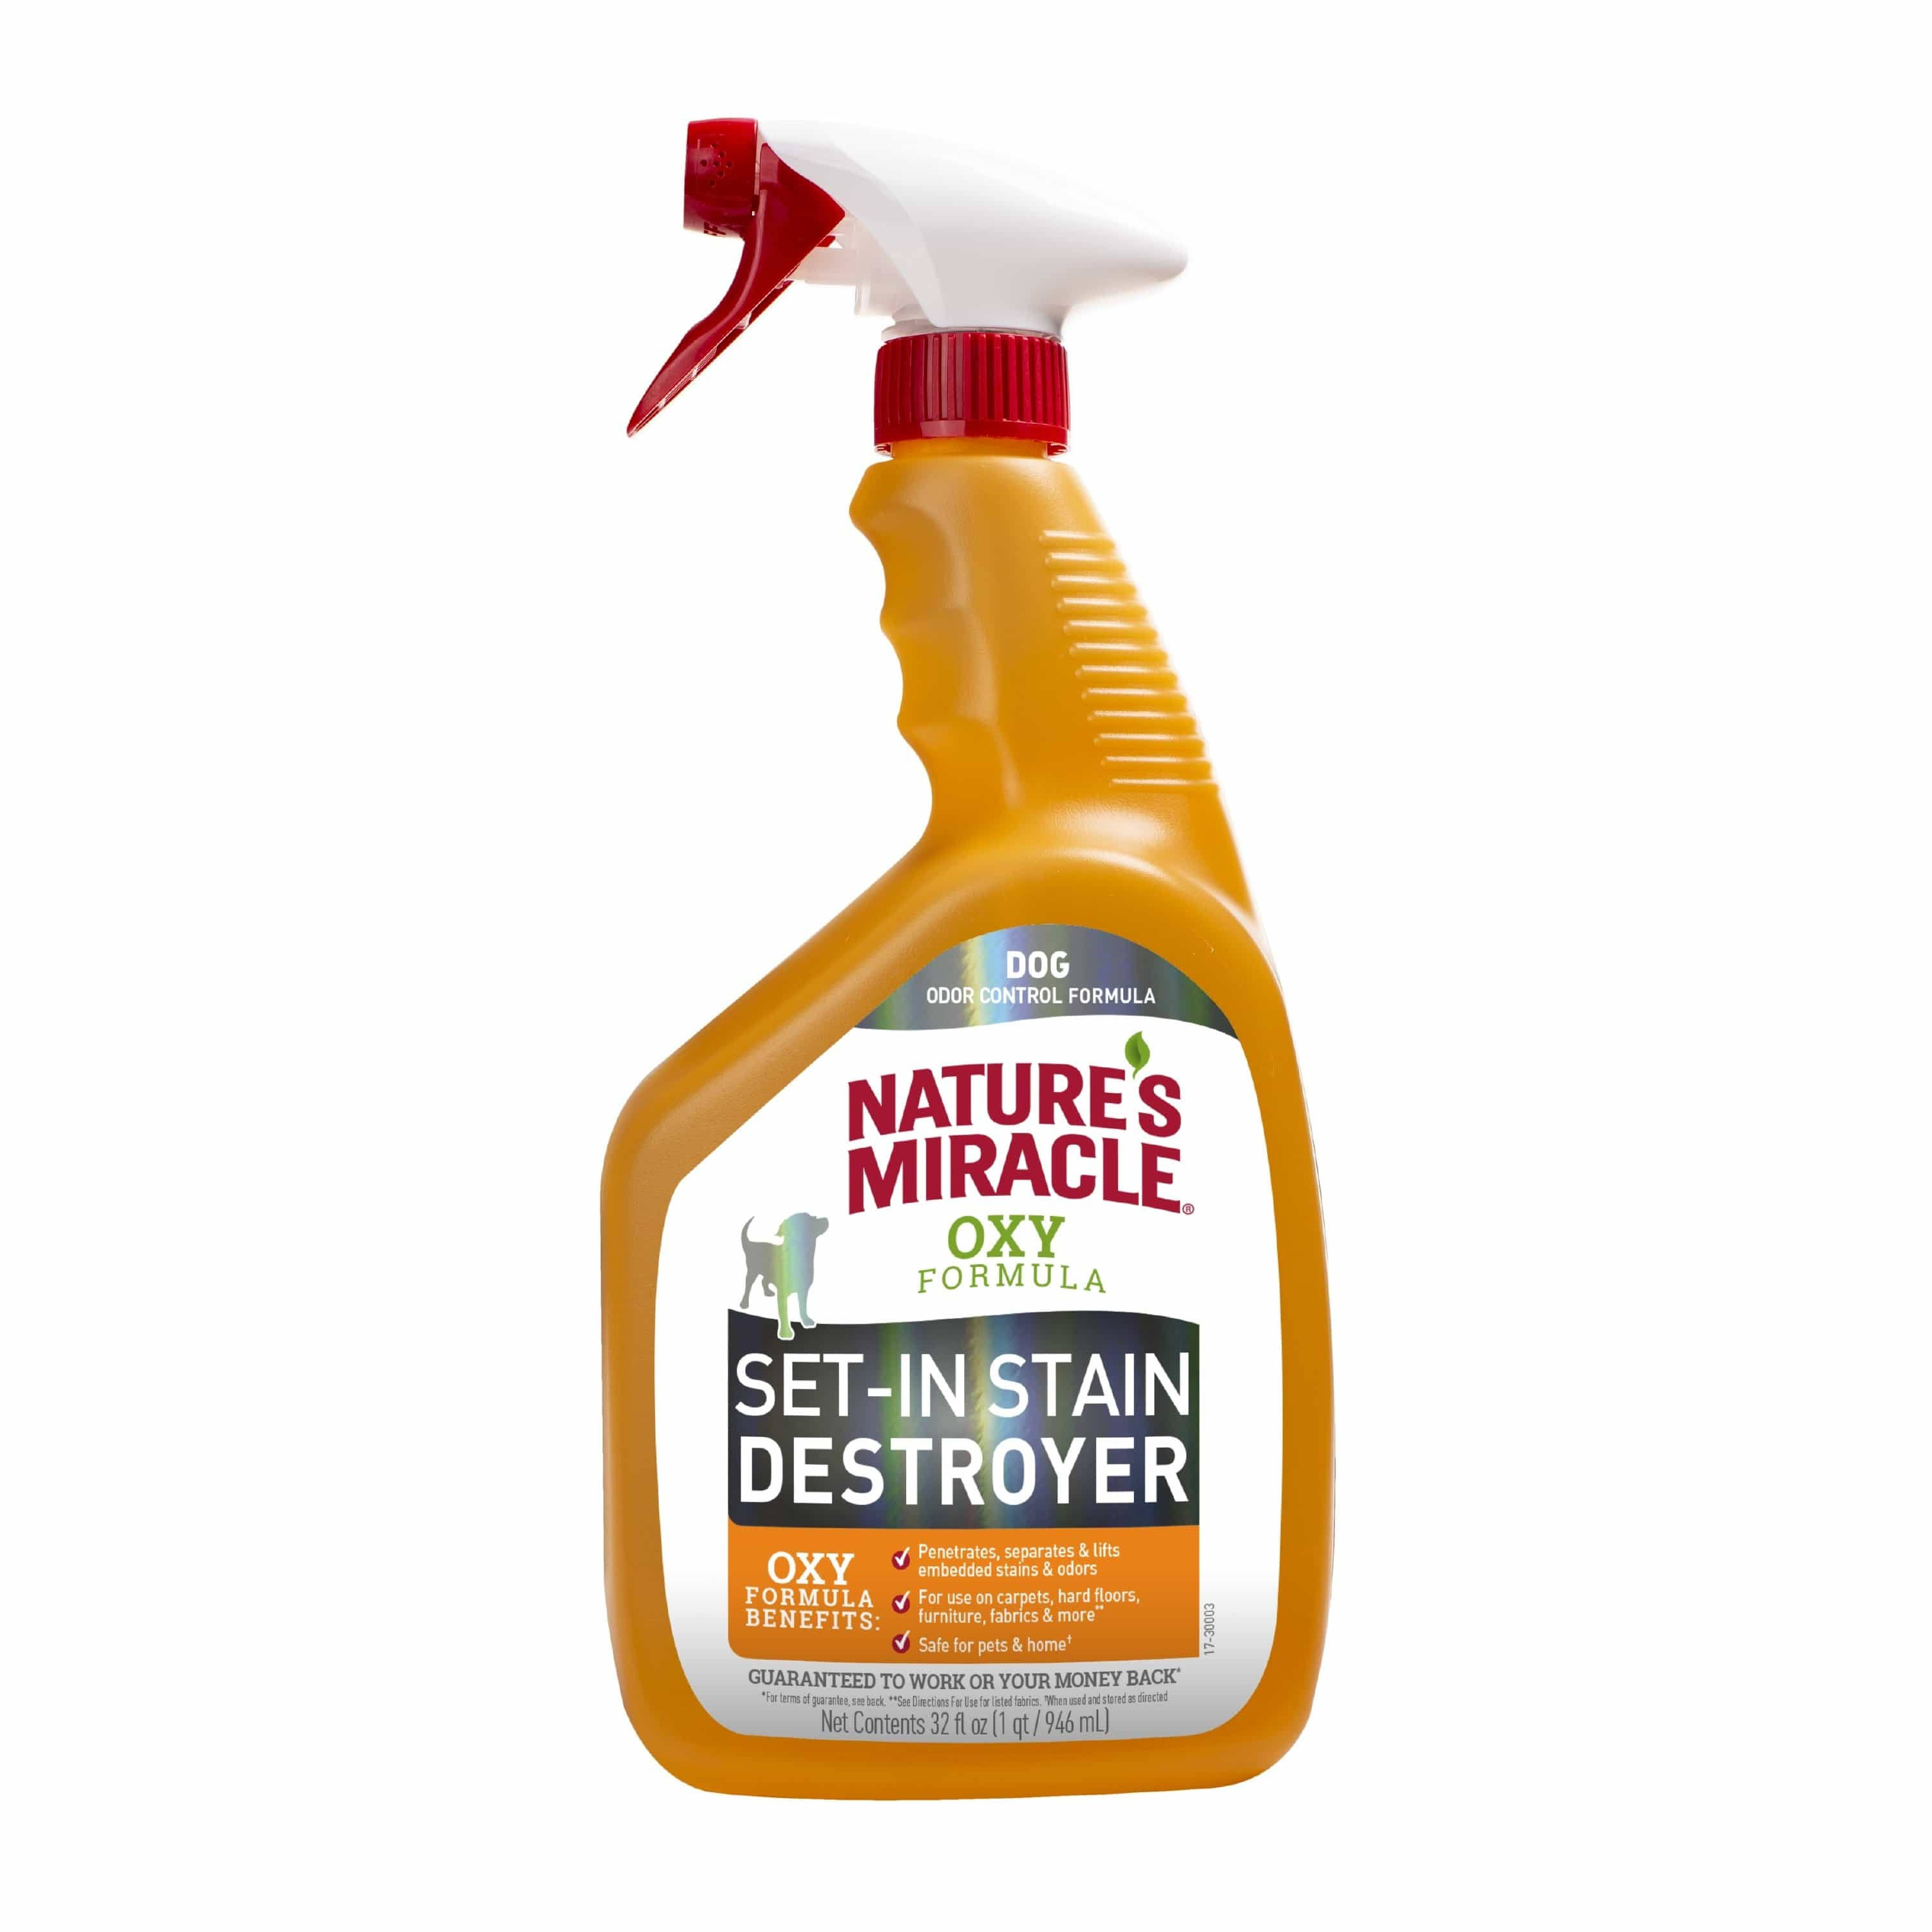 Nature's Miracle Oxy Set-In Stain Destroyer 709ml | Just for Pets